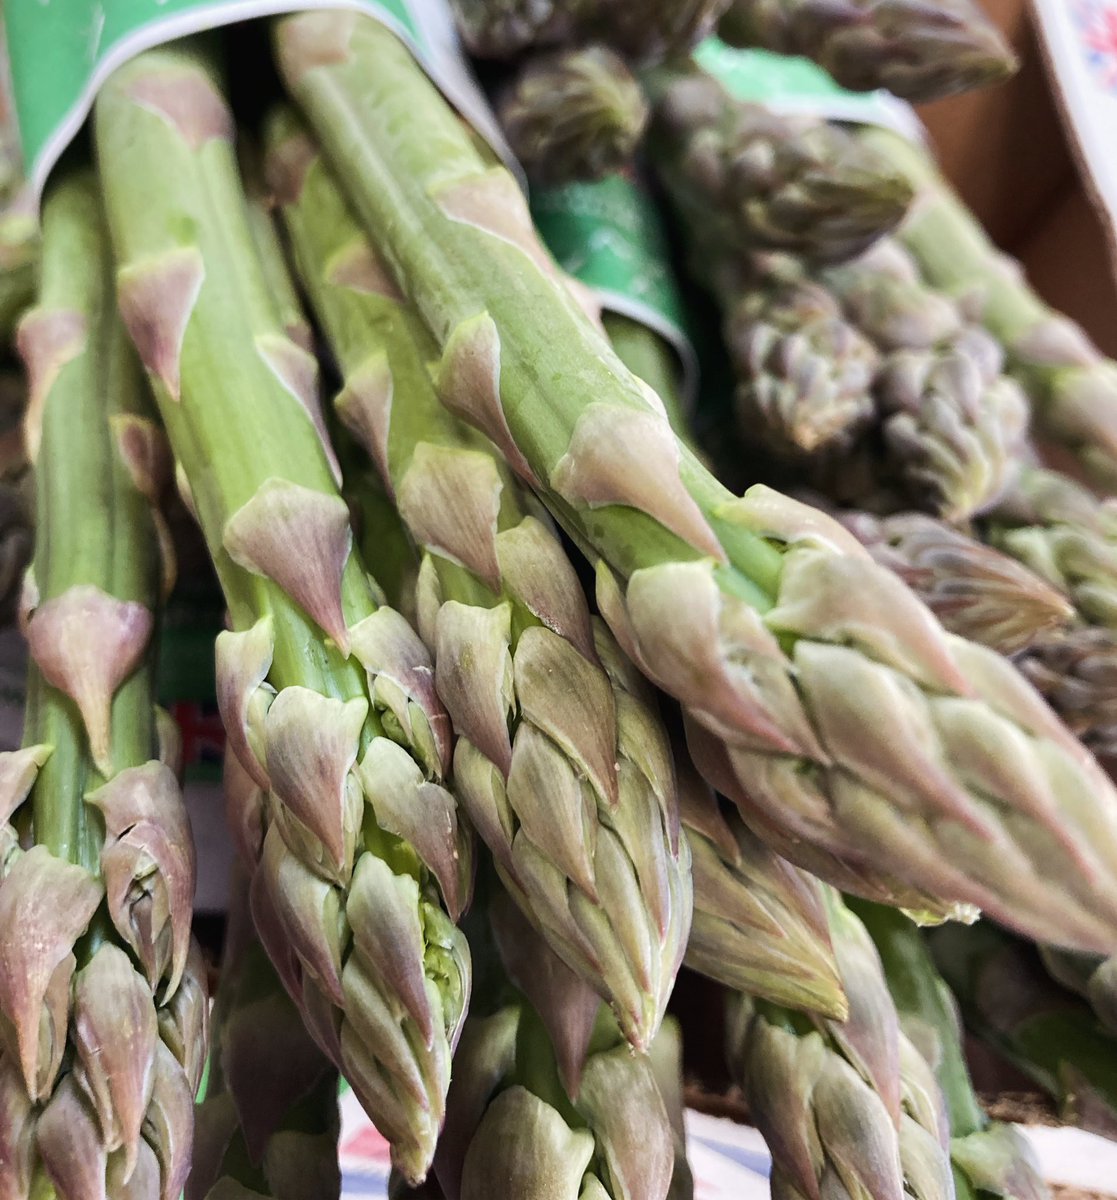 English Asparagus from the Wye Valley has started and is available to order from us now. Order over the phone, online or via e-mail up to 10.30pm for next day delivery #englishasparagus #asparagusseason #asparagus #wyevalley #freshproduce